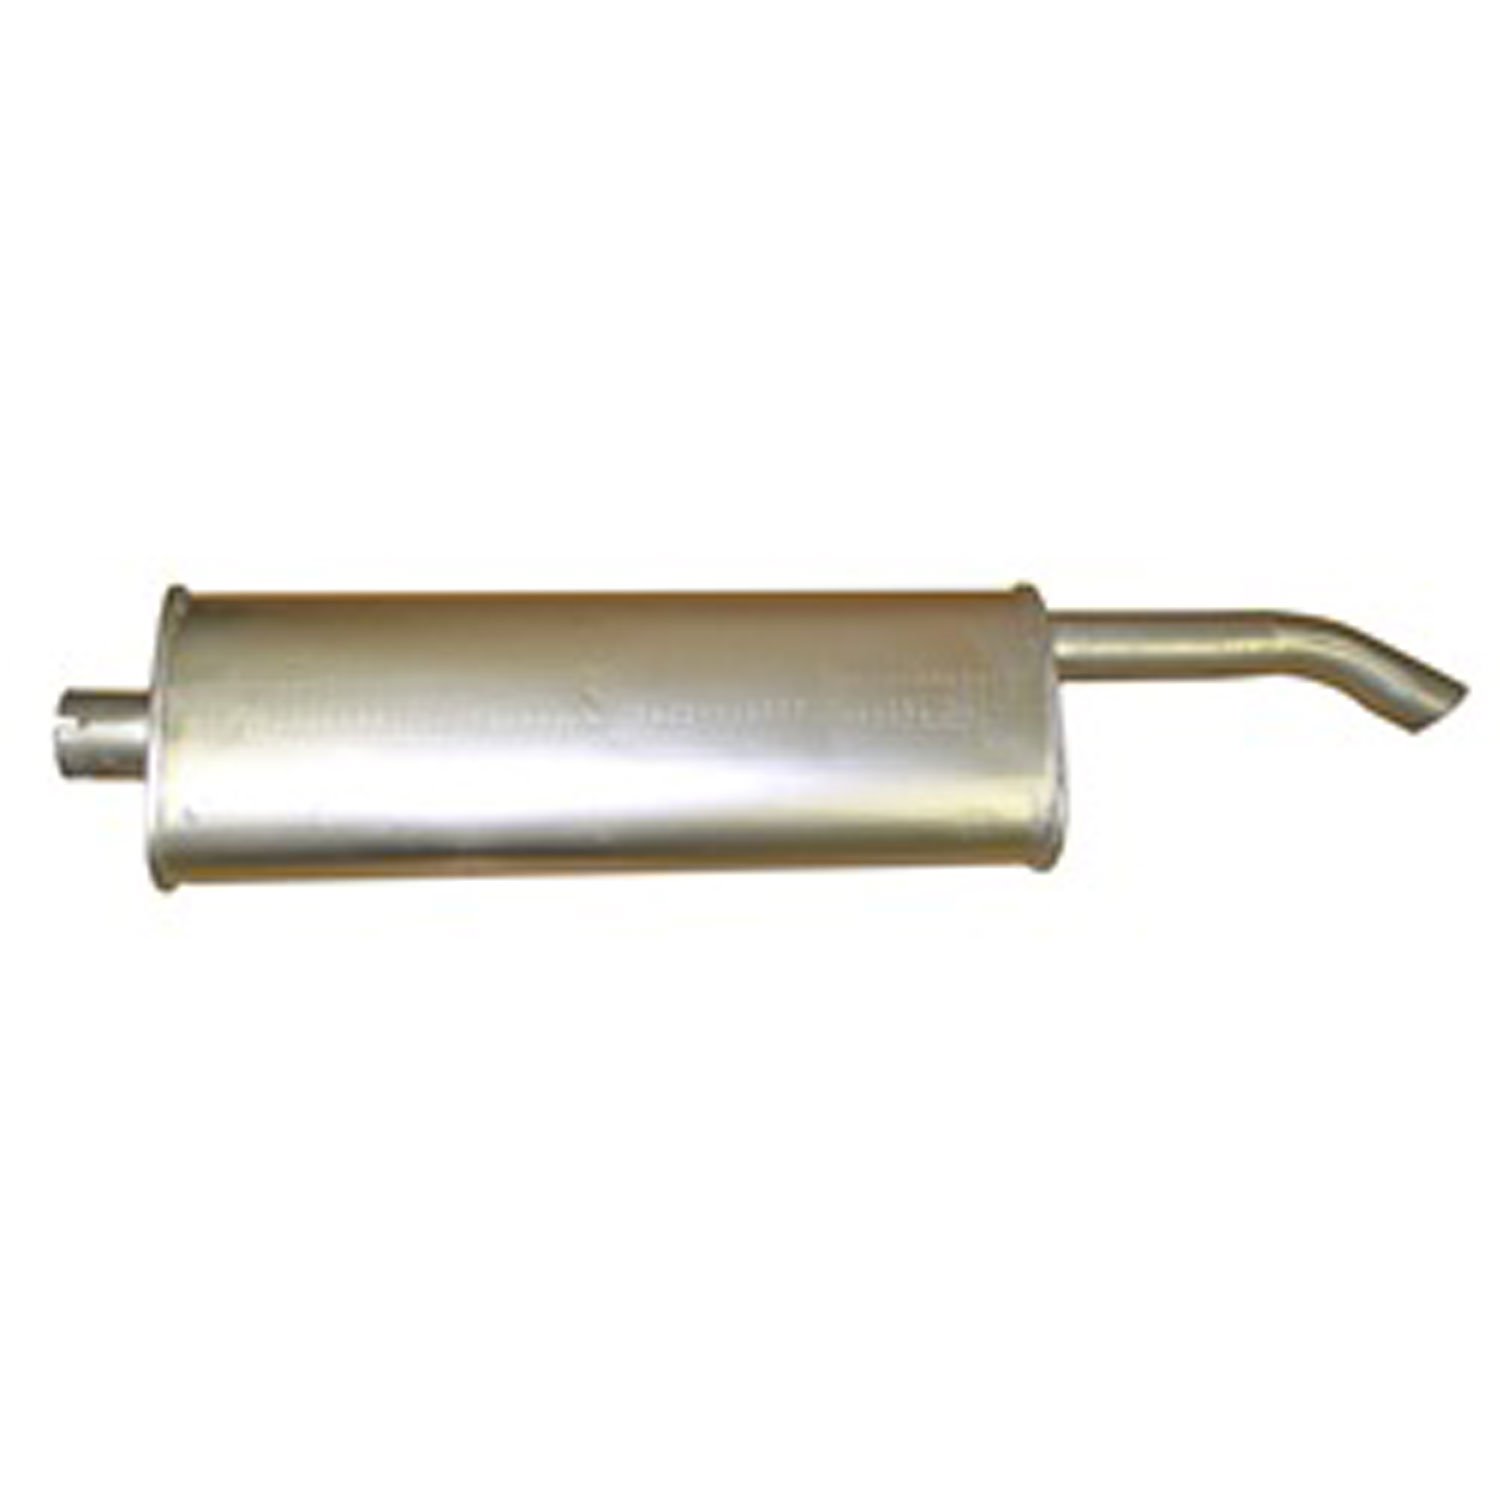 oval-shaped replacement muffler from Omix-ADA, Fits 41-45 Ford GPWs and 41-45 Willys MBs with 134 cubic inch engine.